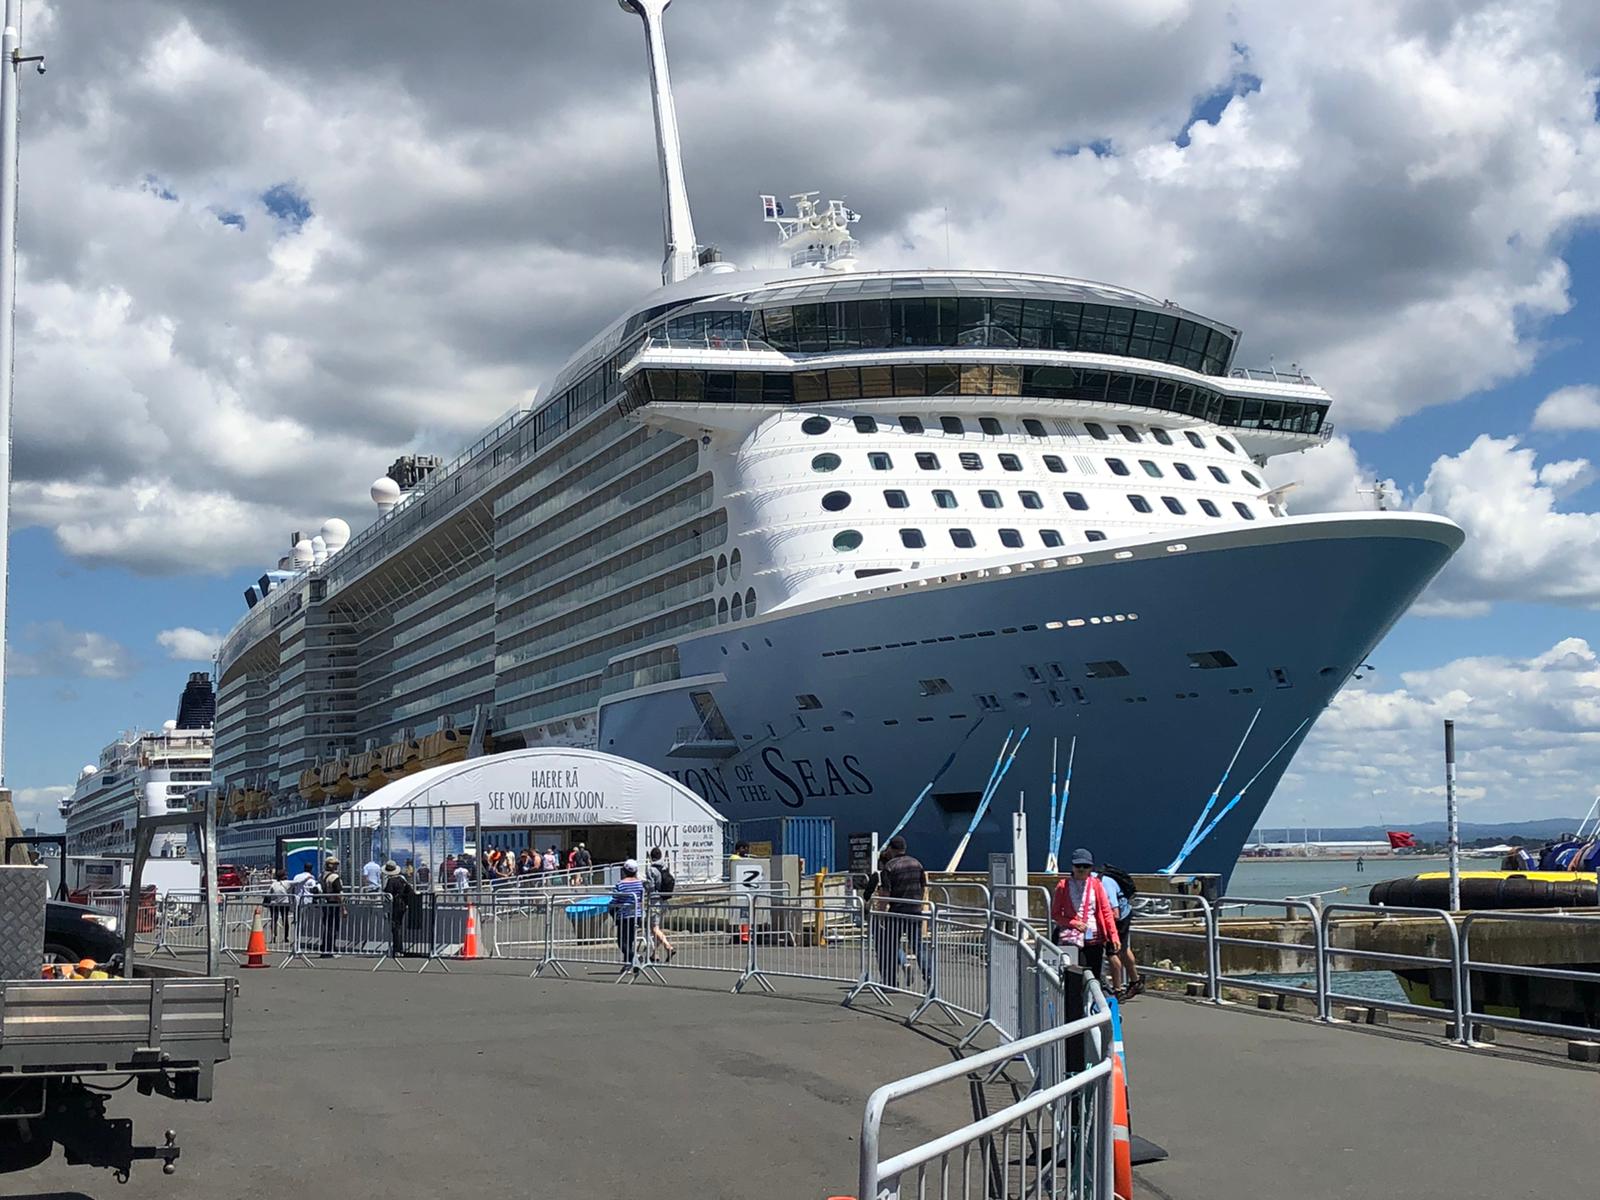 The Ovation of the Seas cruise ship in port on Tuesday. An unknown number of passengers were injured in the eruption.